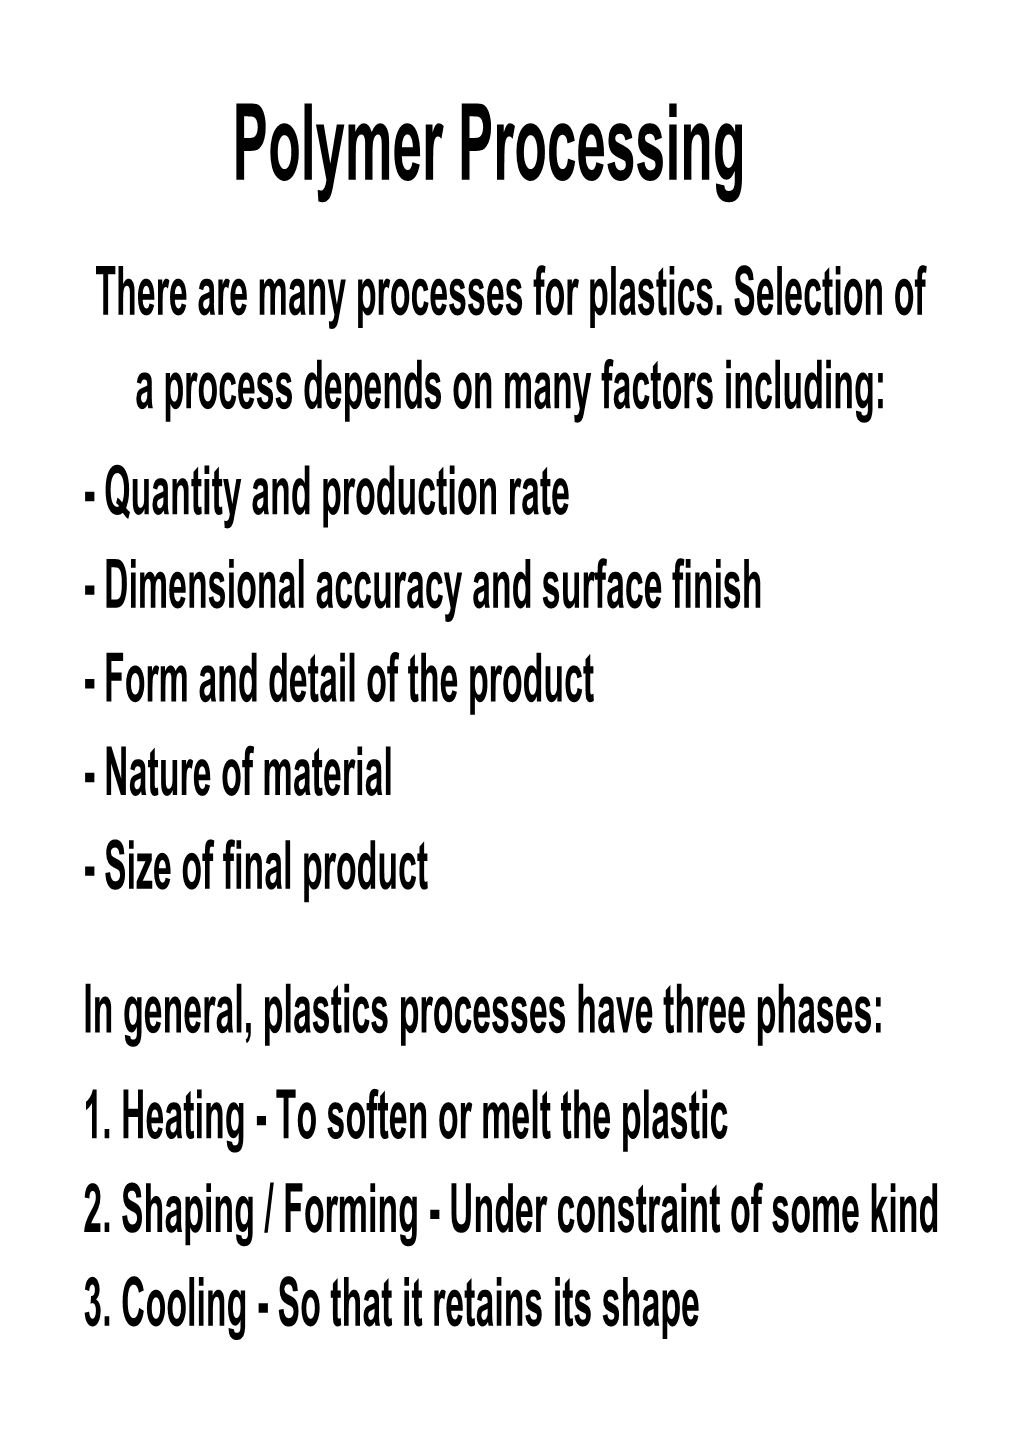 Polymer Processing There Are Many Processes for Plastics